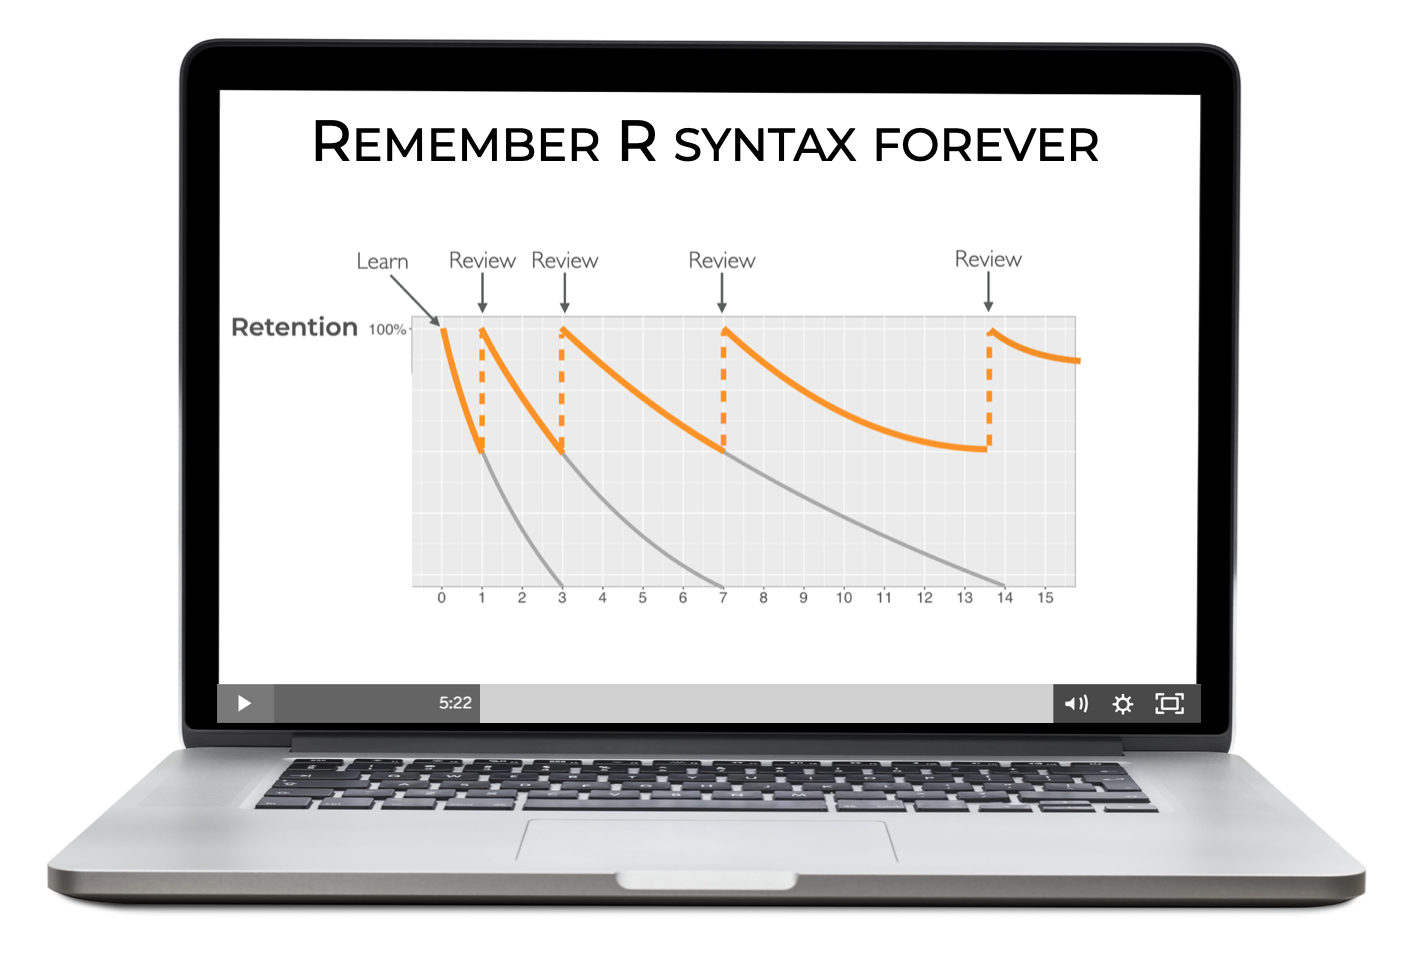 An image of a laptop showing how repeat practice helps you remember longer.